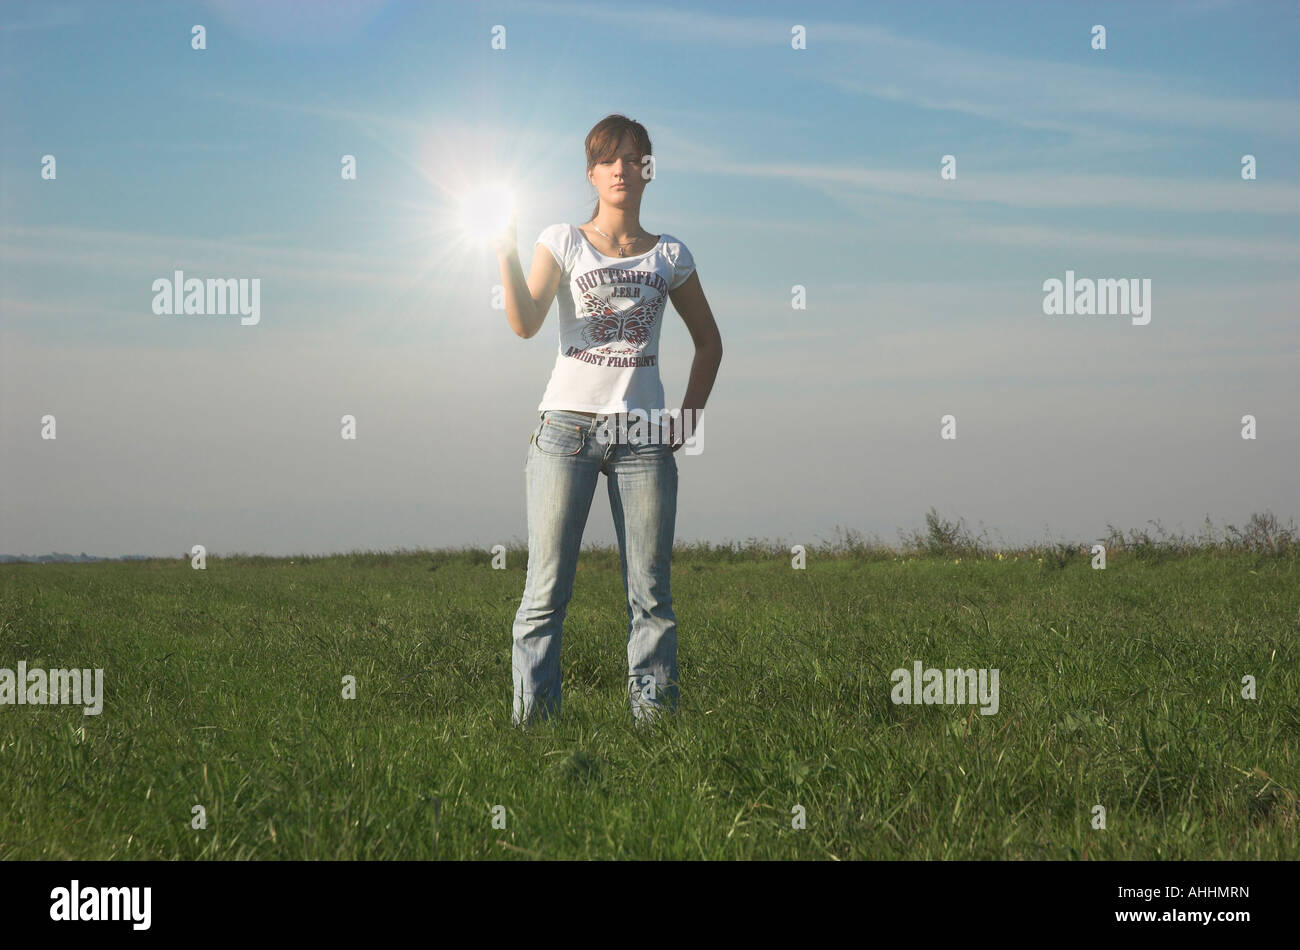 young-woman-standing-in-field-holding-mirror-sunlight-reflecting-in-AHHMRN.jpg